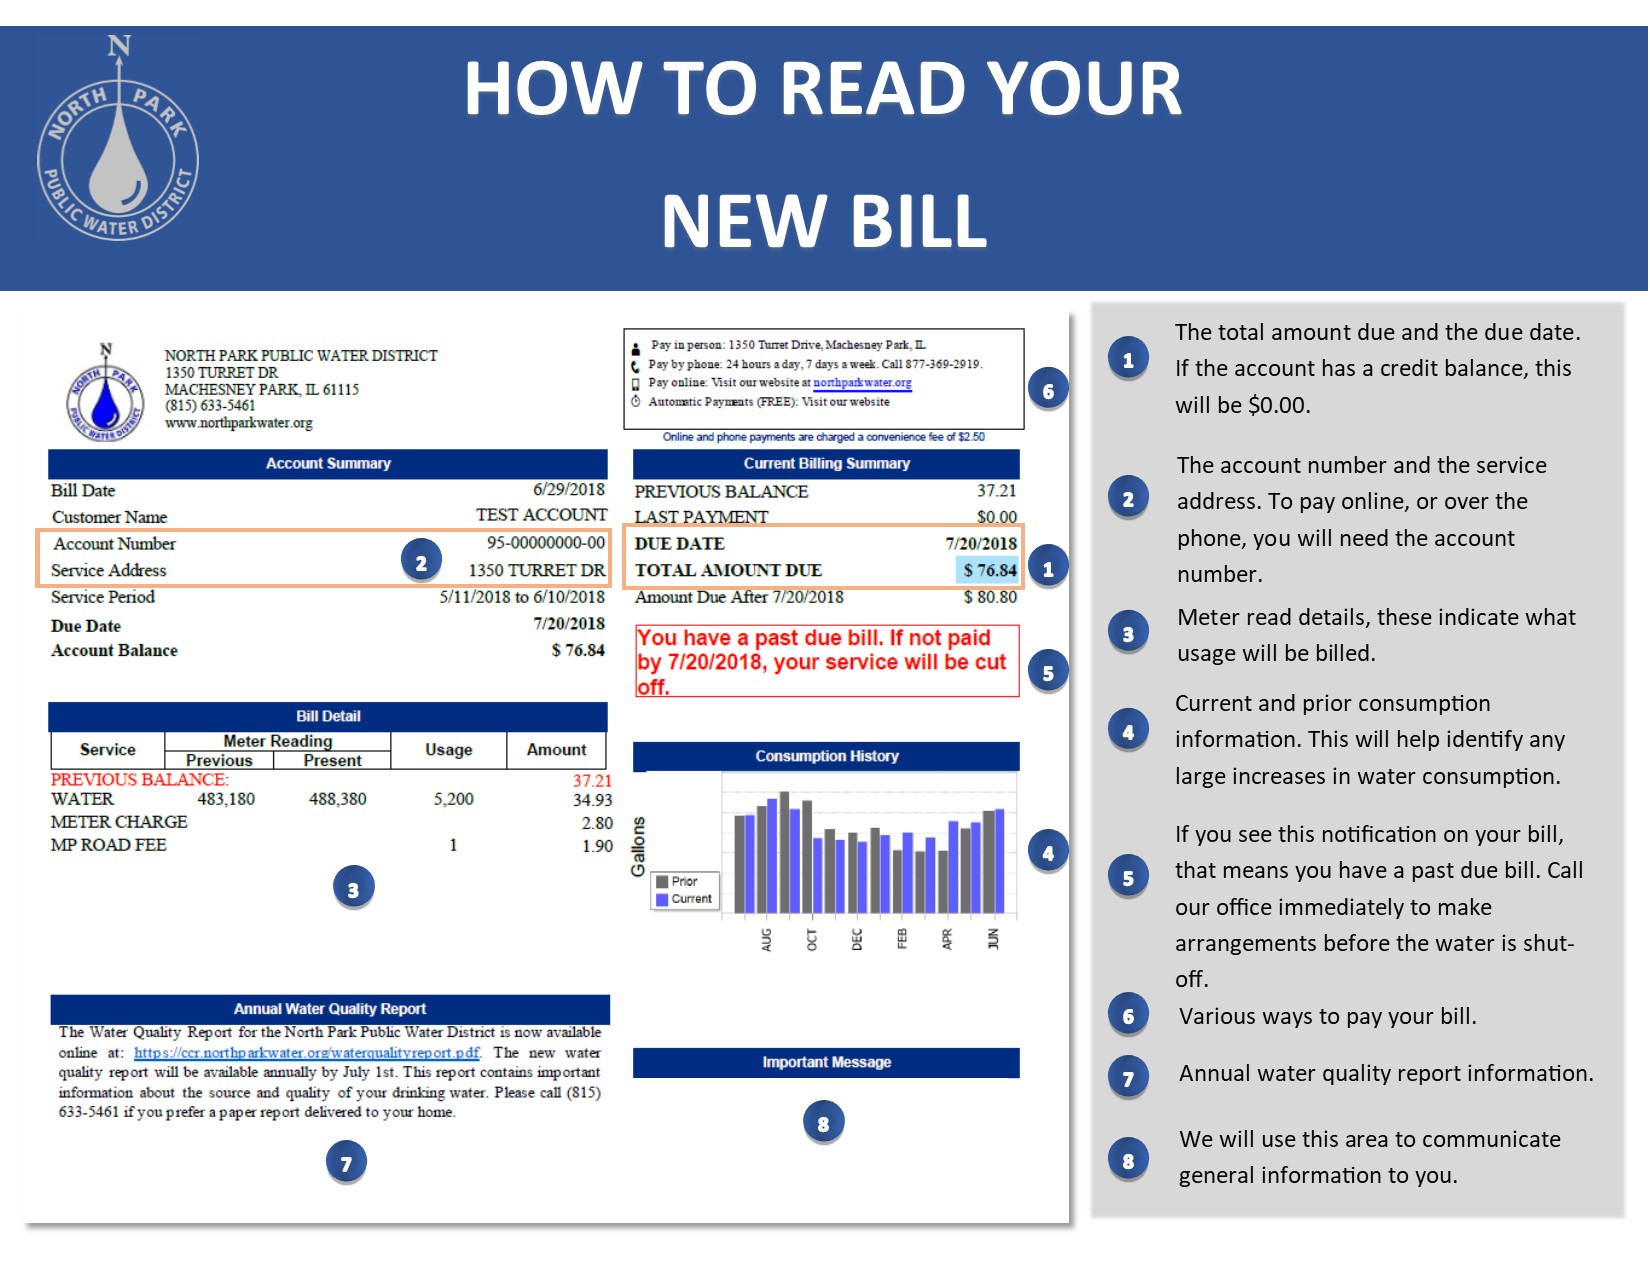 How to Read Your New Bill